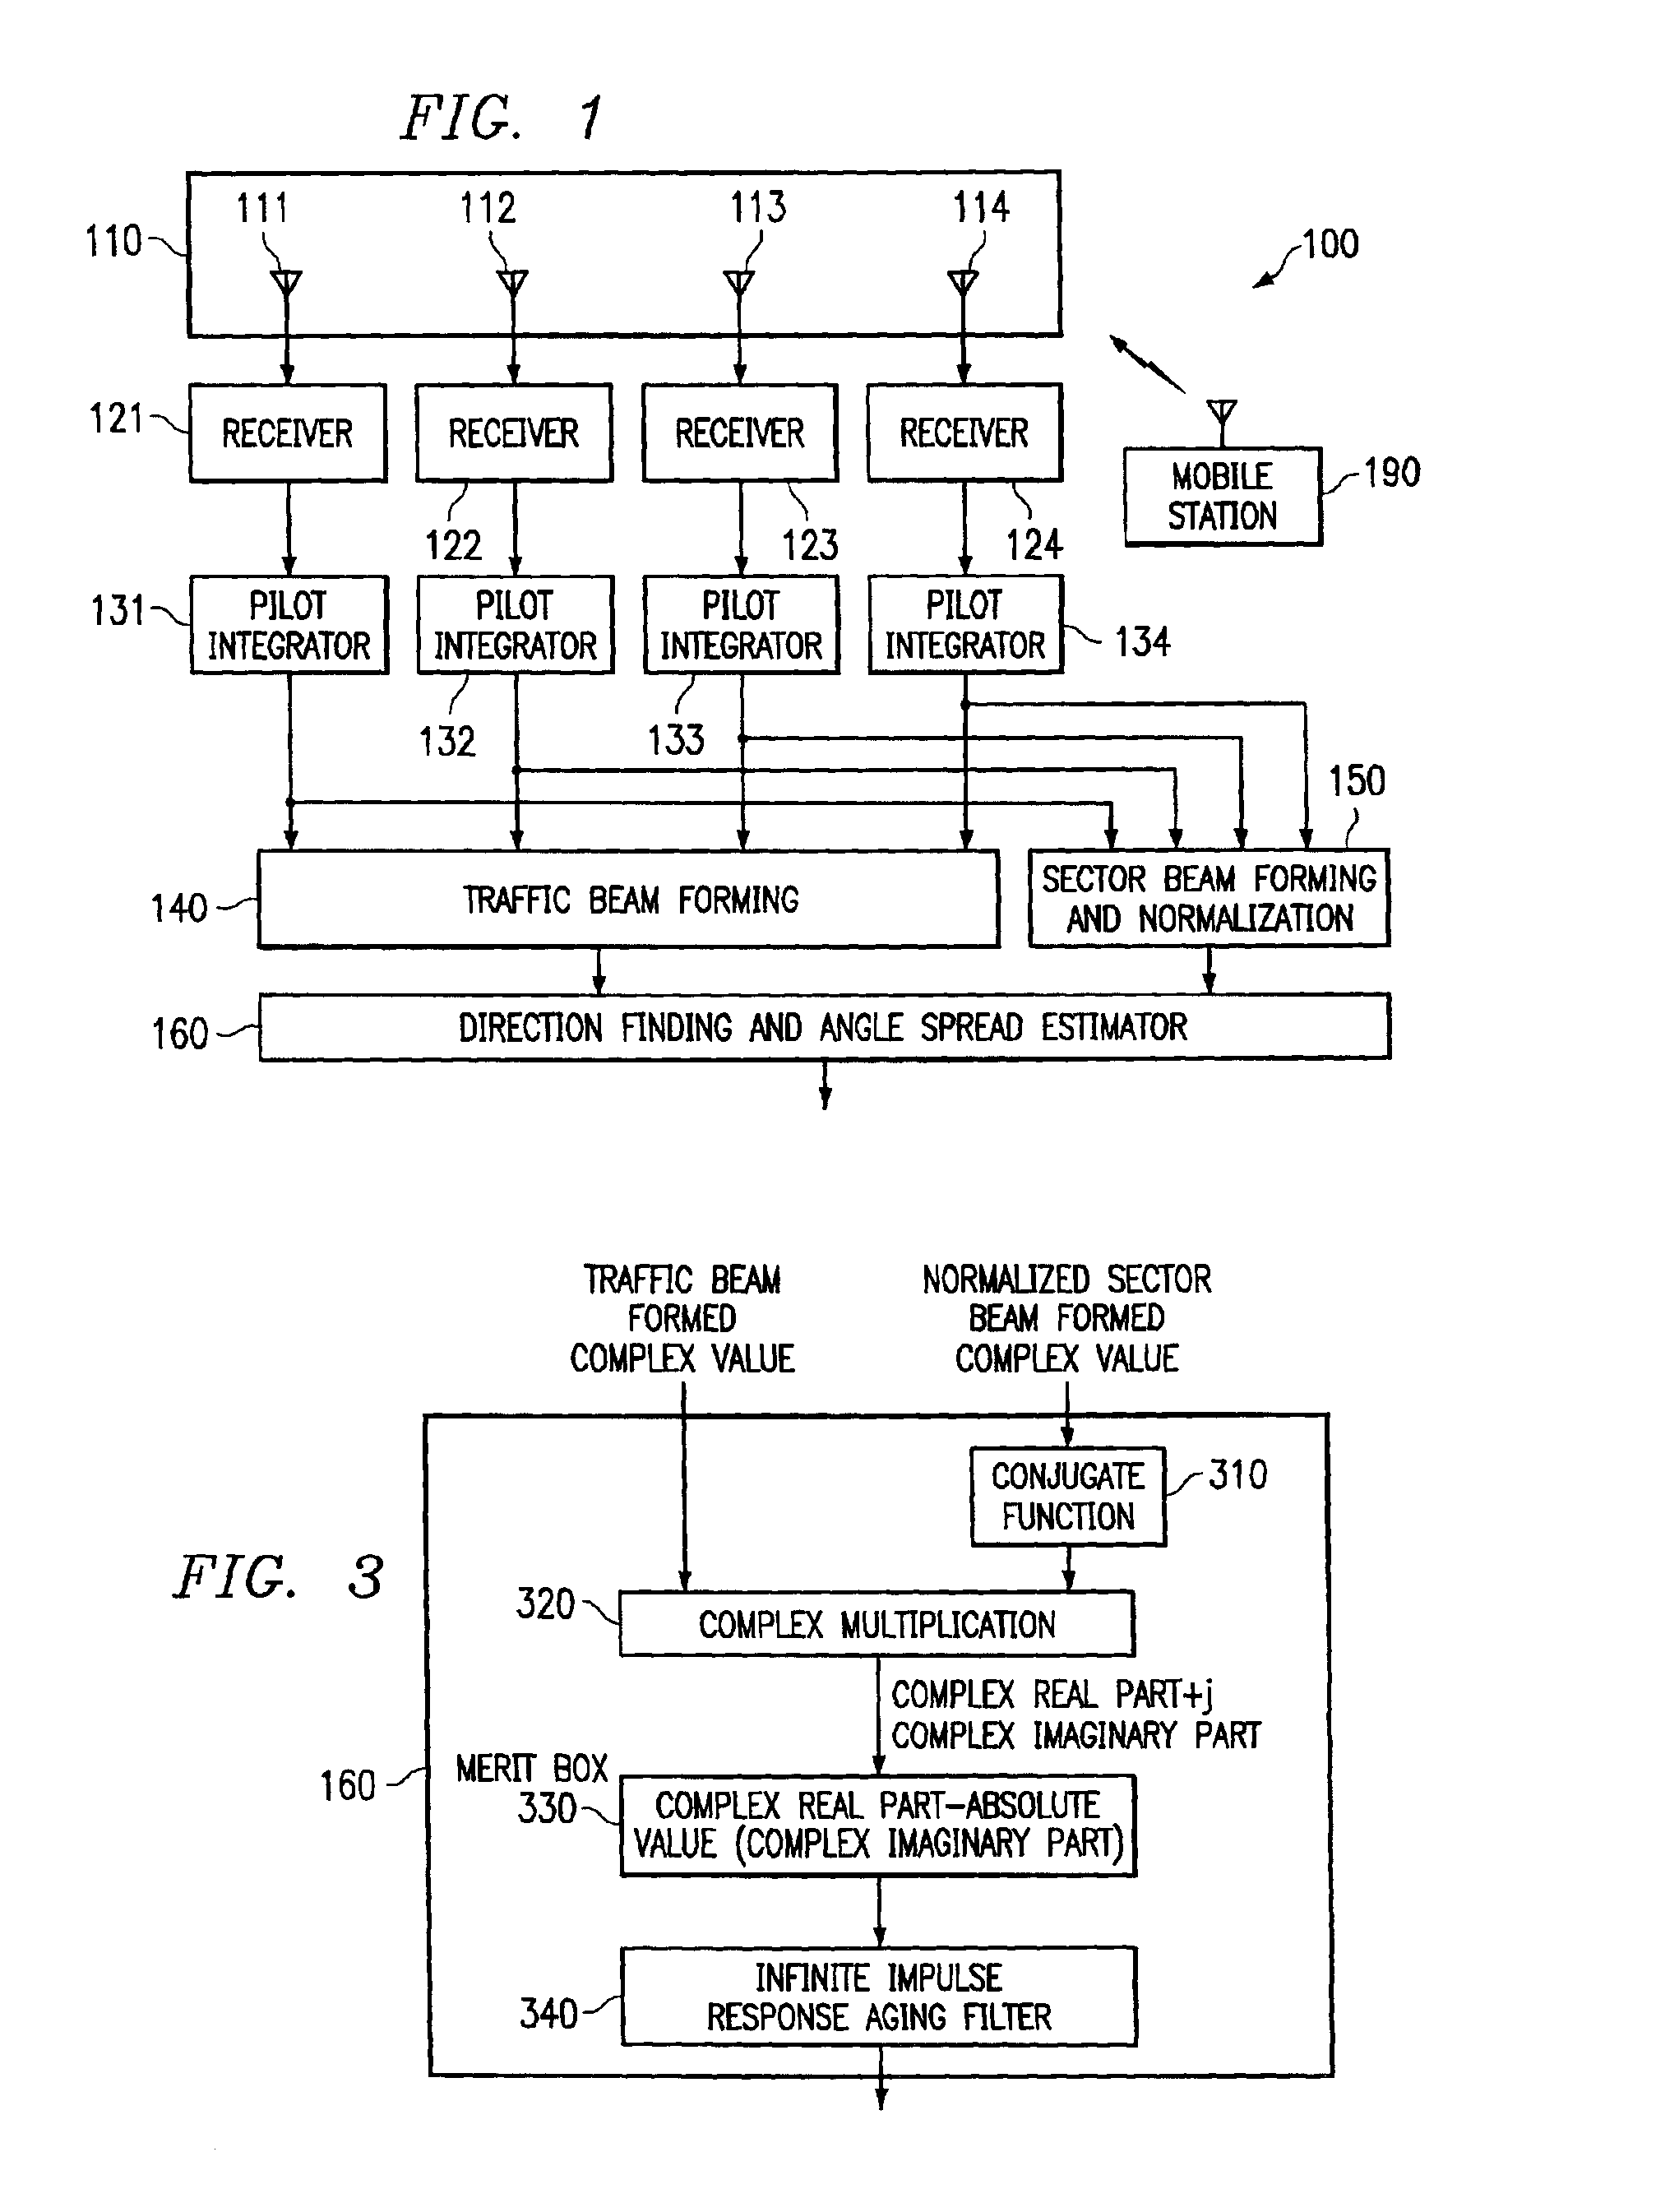 System and method for providing phase matching with optimized beam widths